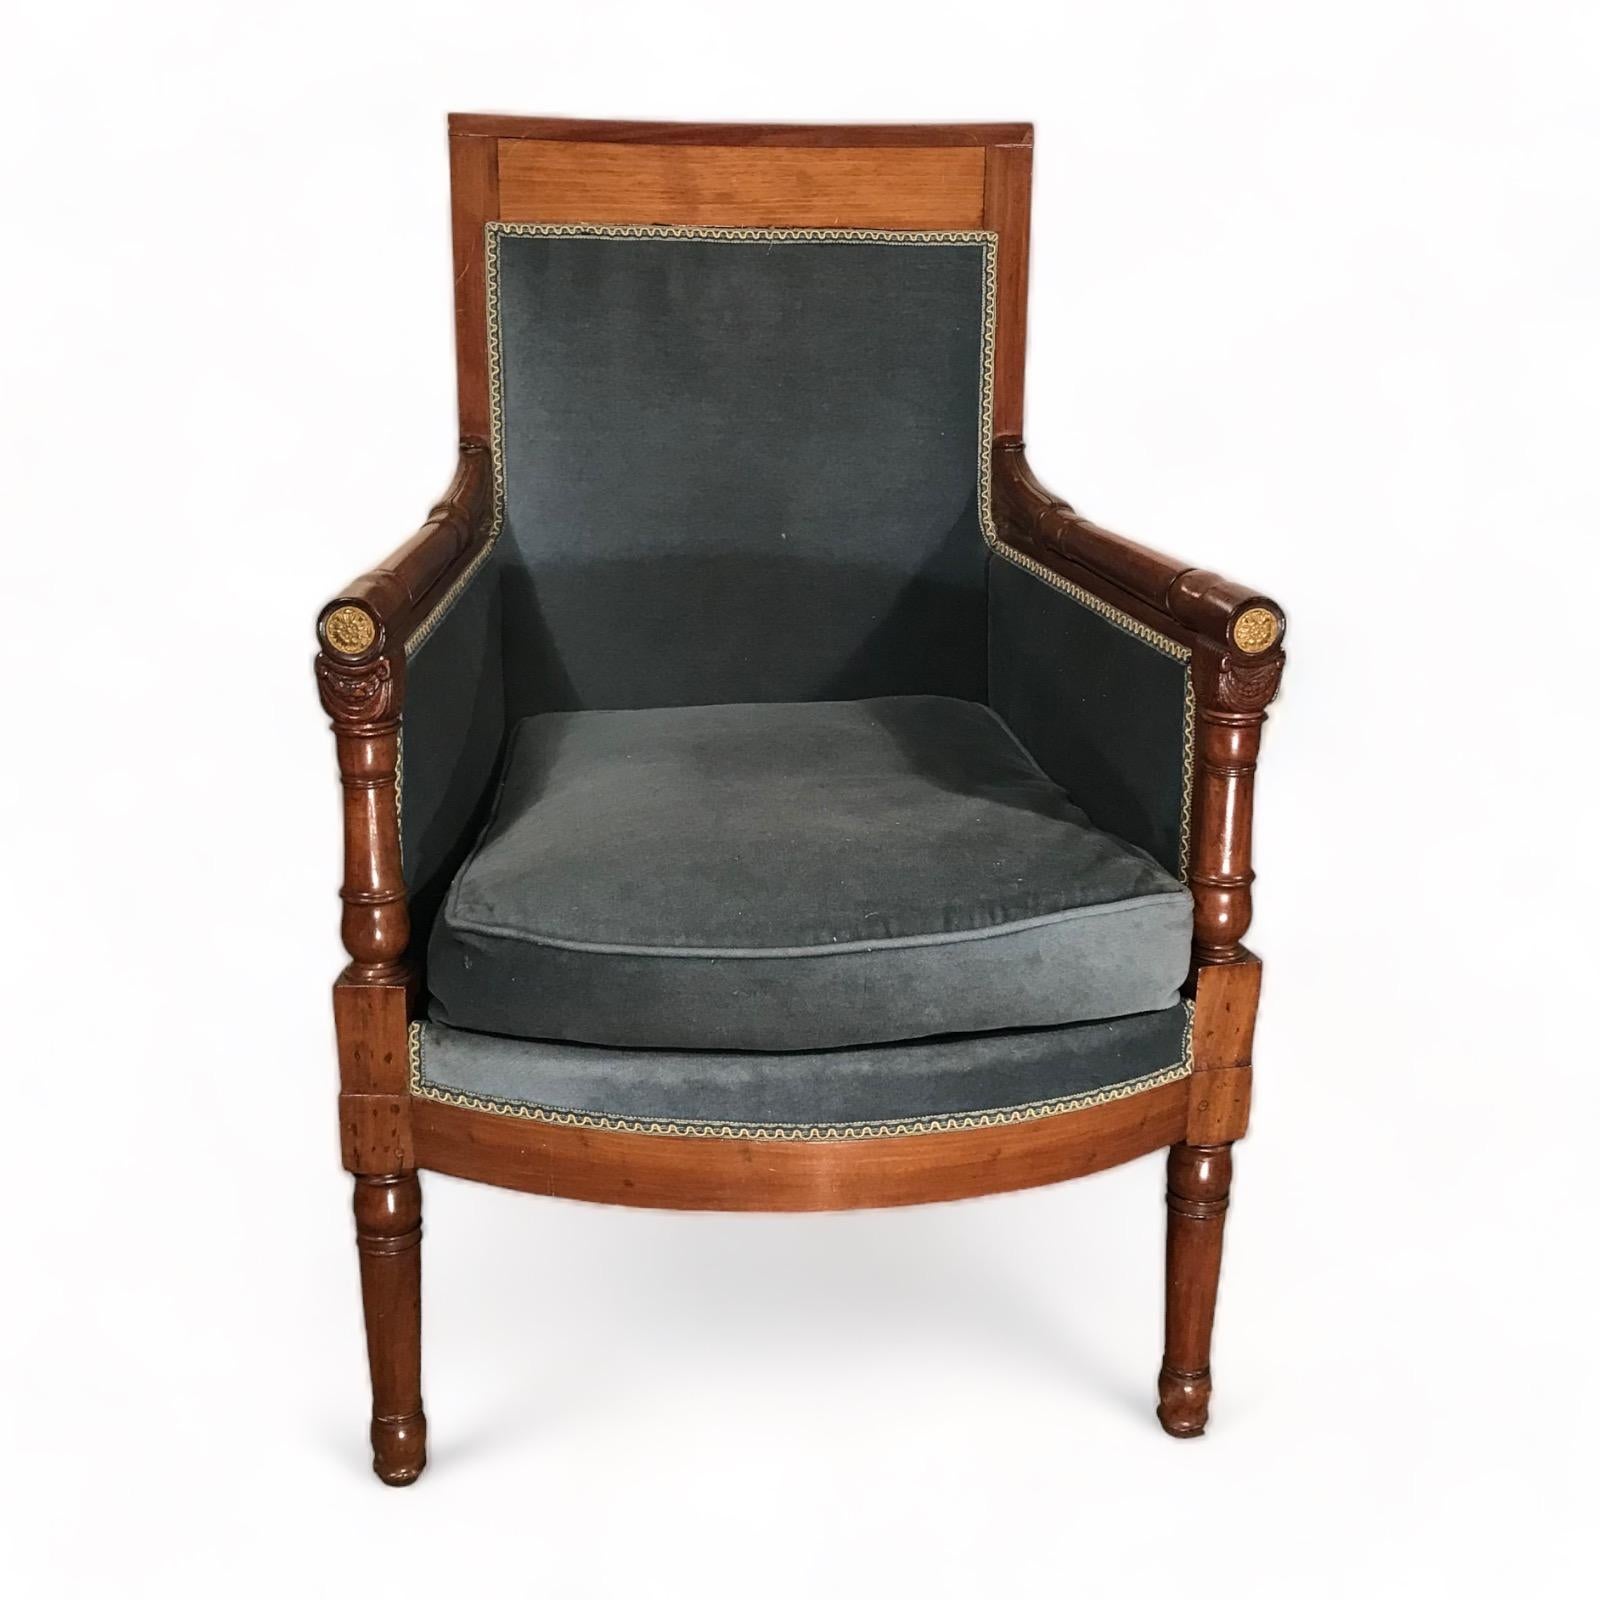 French Empire Salon Suite, France 1810, Manner of Jacob Desmalter (1770-1841) For Sale